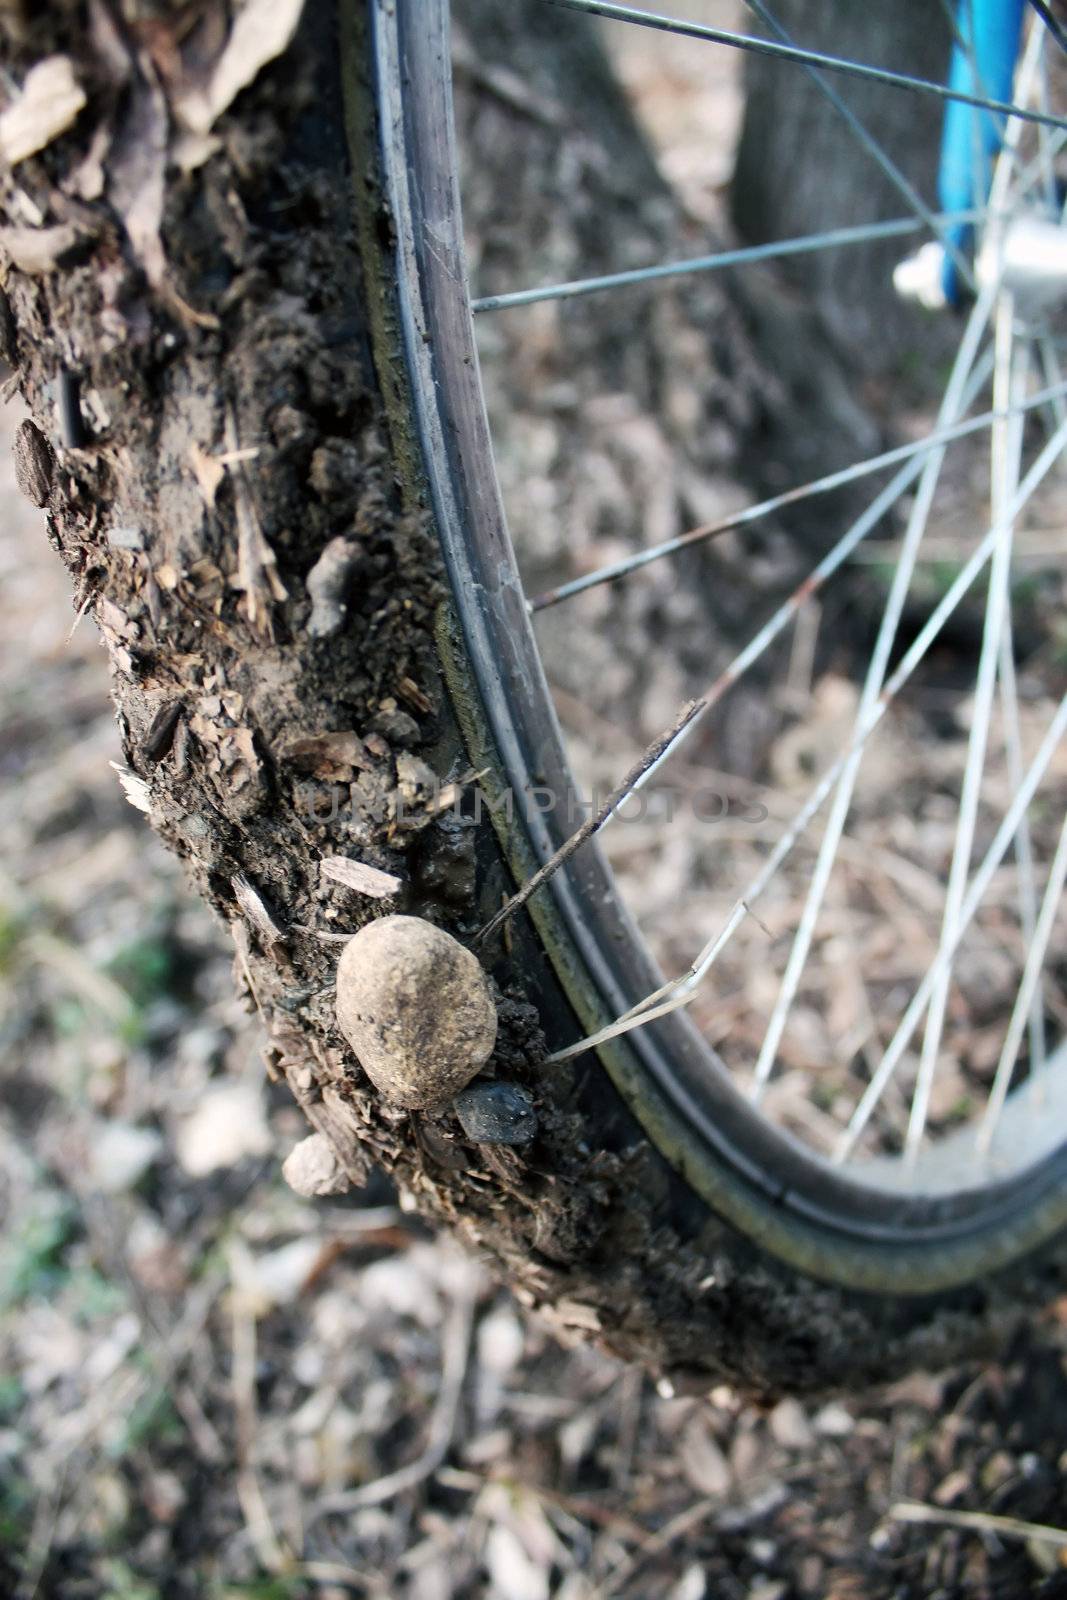 thick mud and rocks, stuck to a bike tire